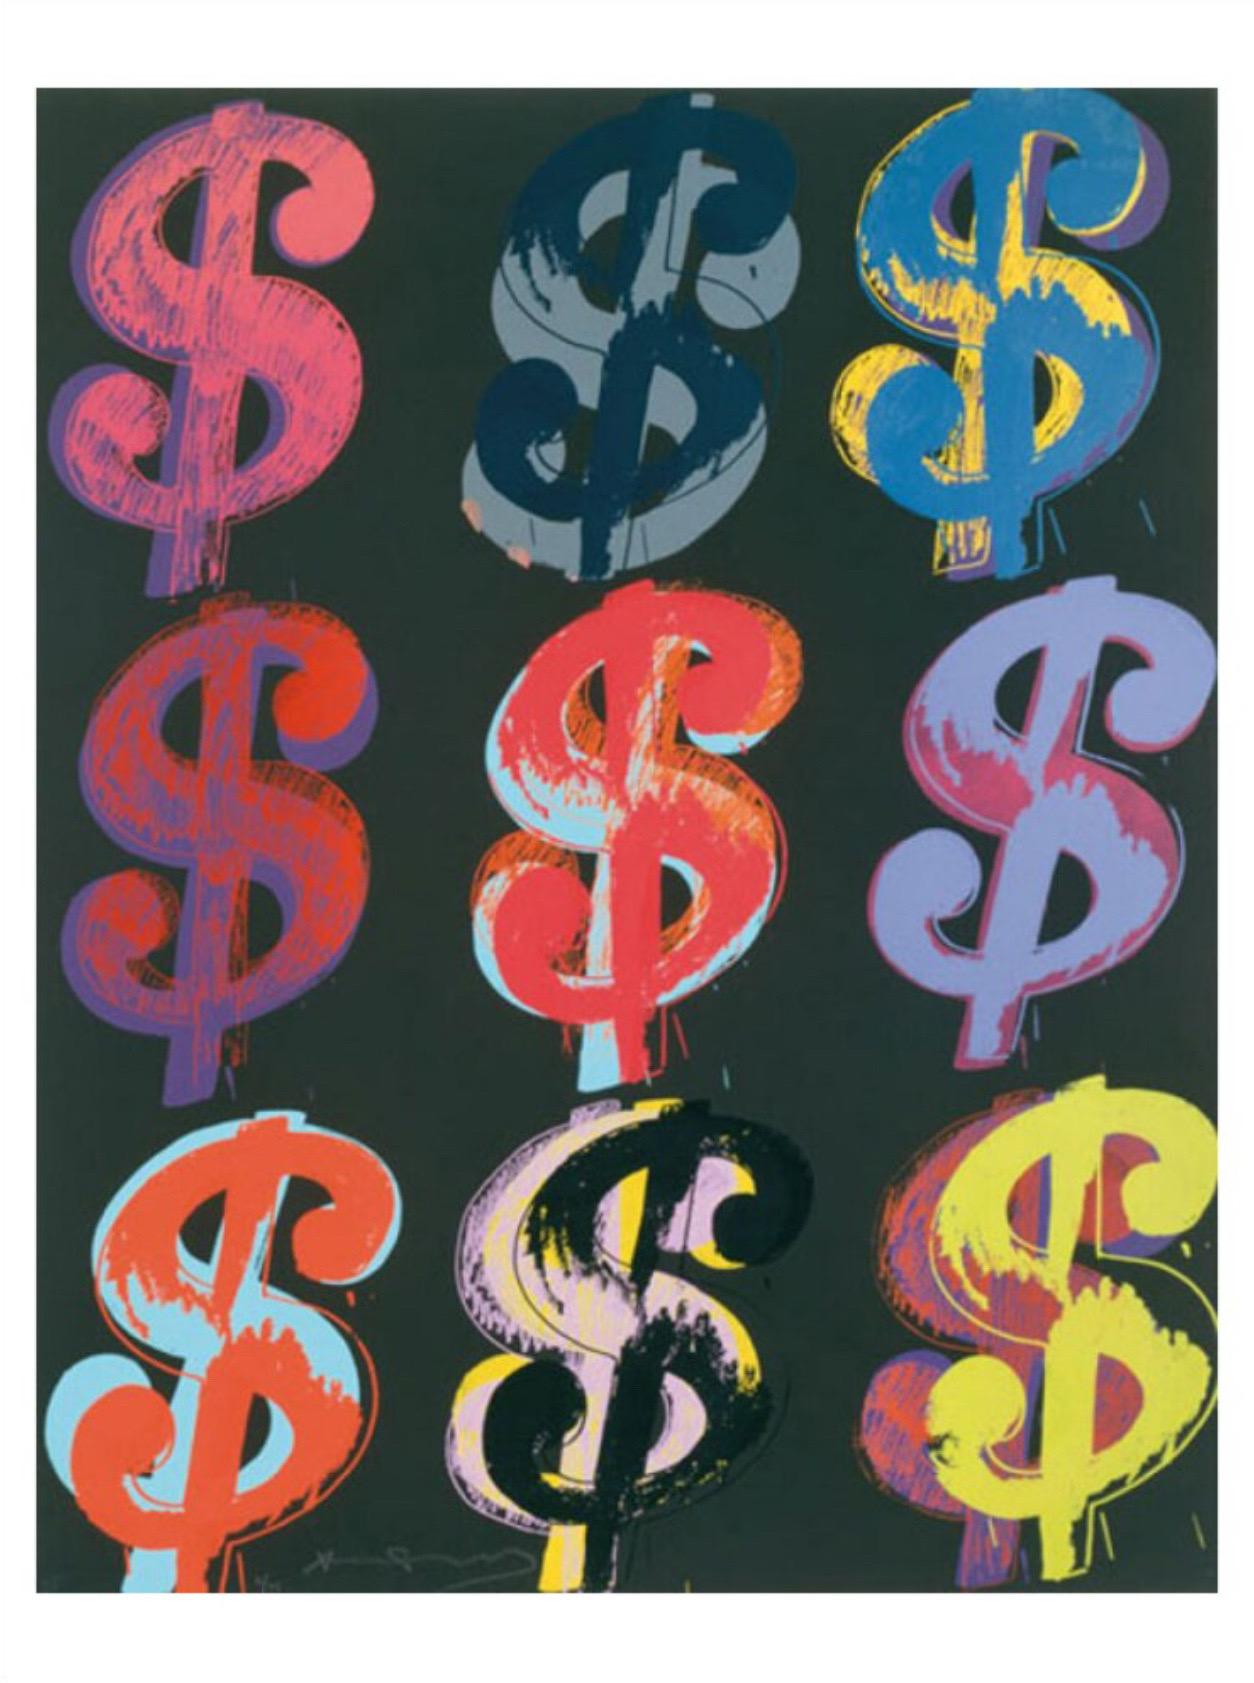 Andy Warhol, $9, 1982 (on black)

Matt 250gsm conservation digital paper

Image size 56 x 71 cm (22.04 x 27.95 in) 

Paper size 60 x 80 cm (23.62 x 31.49 in) 


Money became a very important subject matter for Andy Warhol early on in the 1960s, when